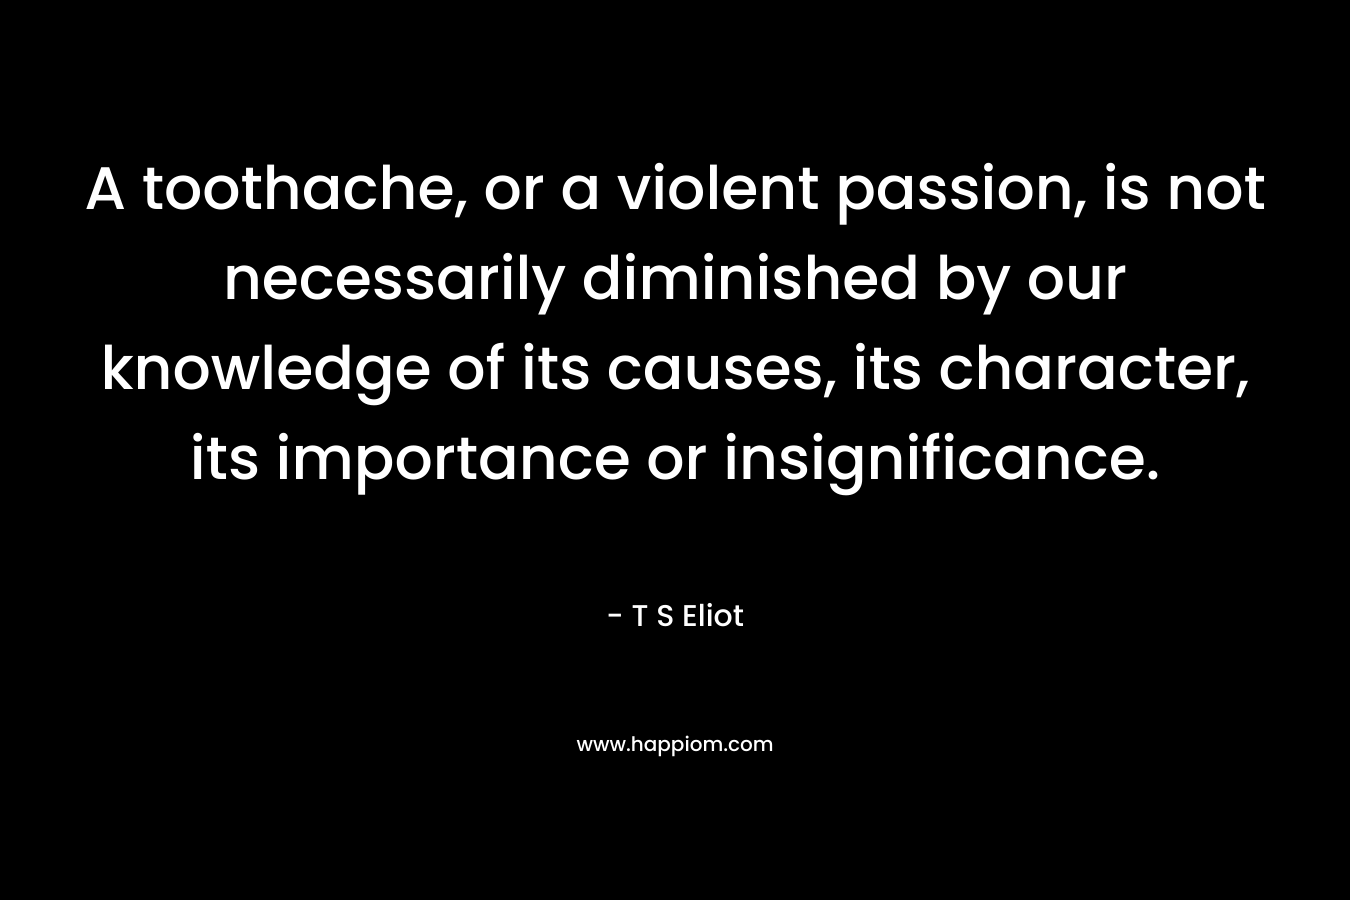 A toothache, or a violent passion, is not necessarily diminished by our knowledge of its causes, its character, its importance or insignificance. – T S Eliot